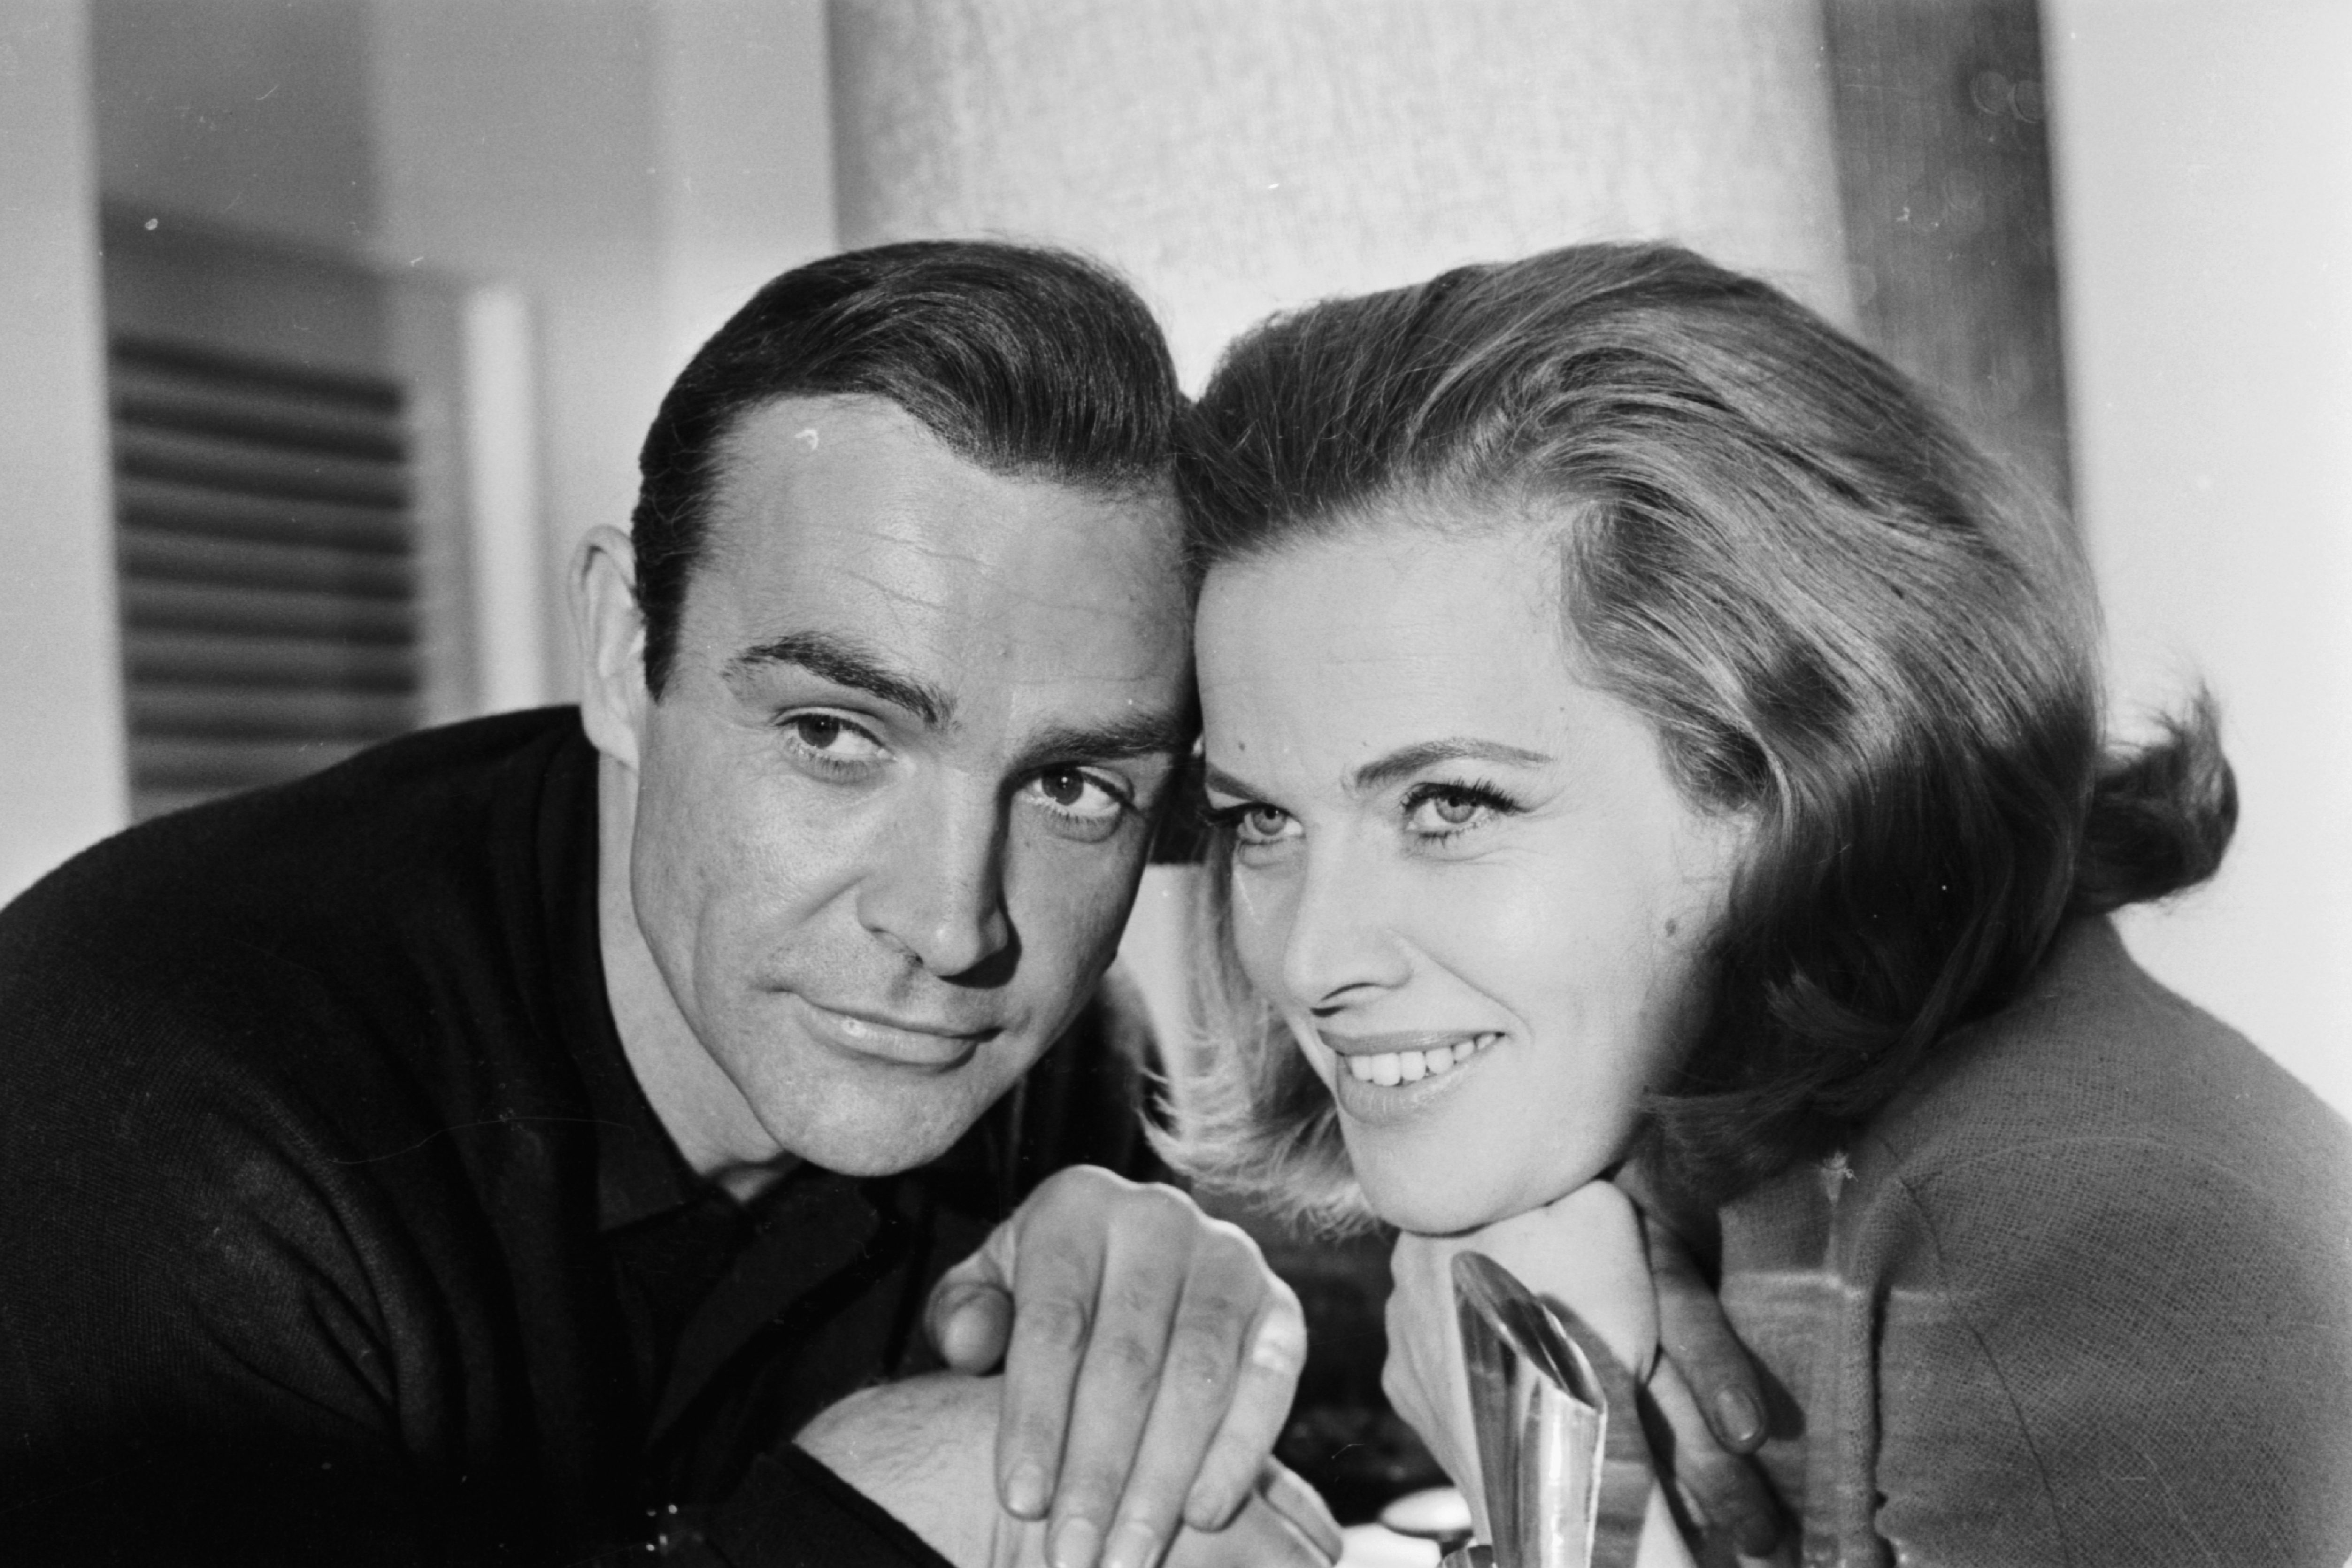 A black and white photo of Sean Connery (James Bond) and Honor Blackman (Pussy Galore) promoting the film "Goldfinger" in 1964